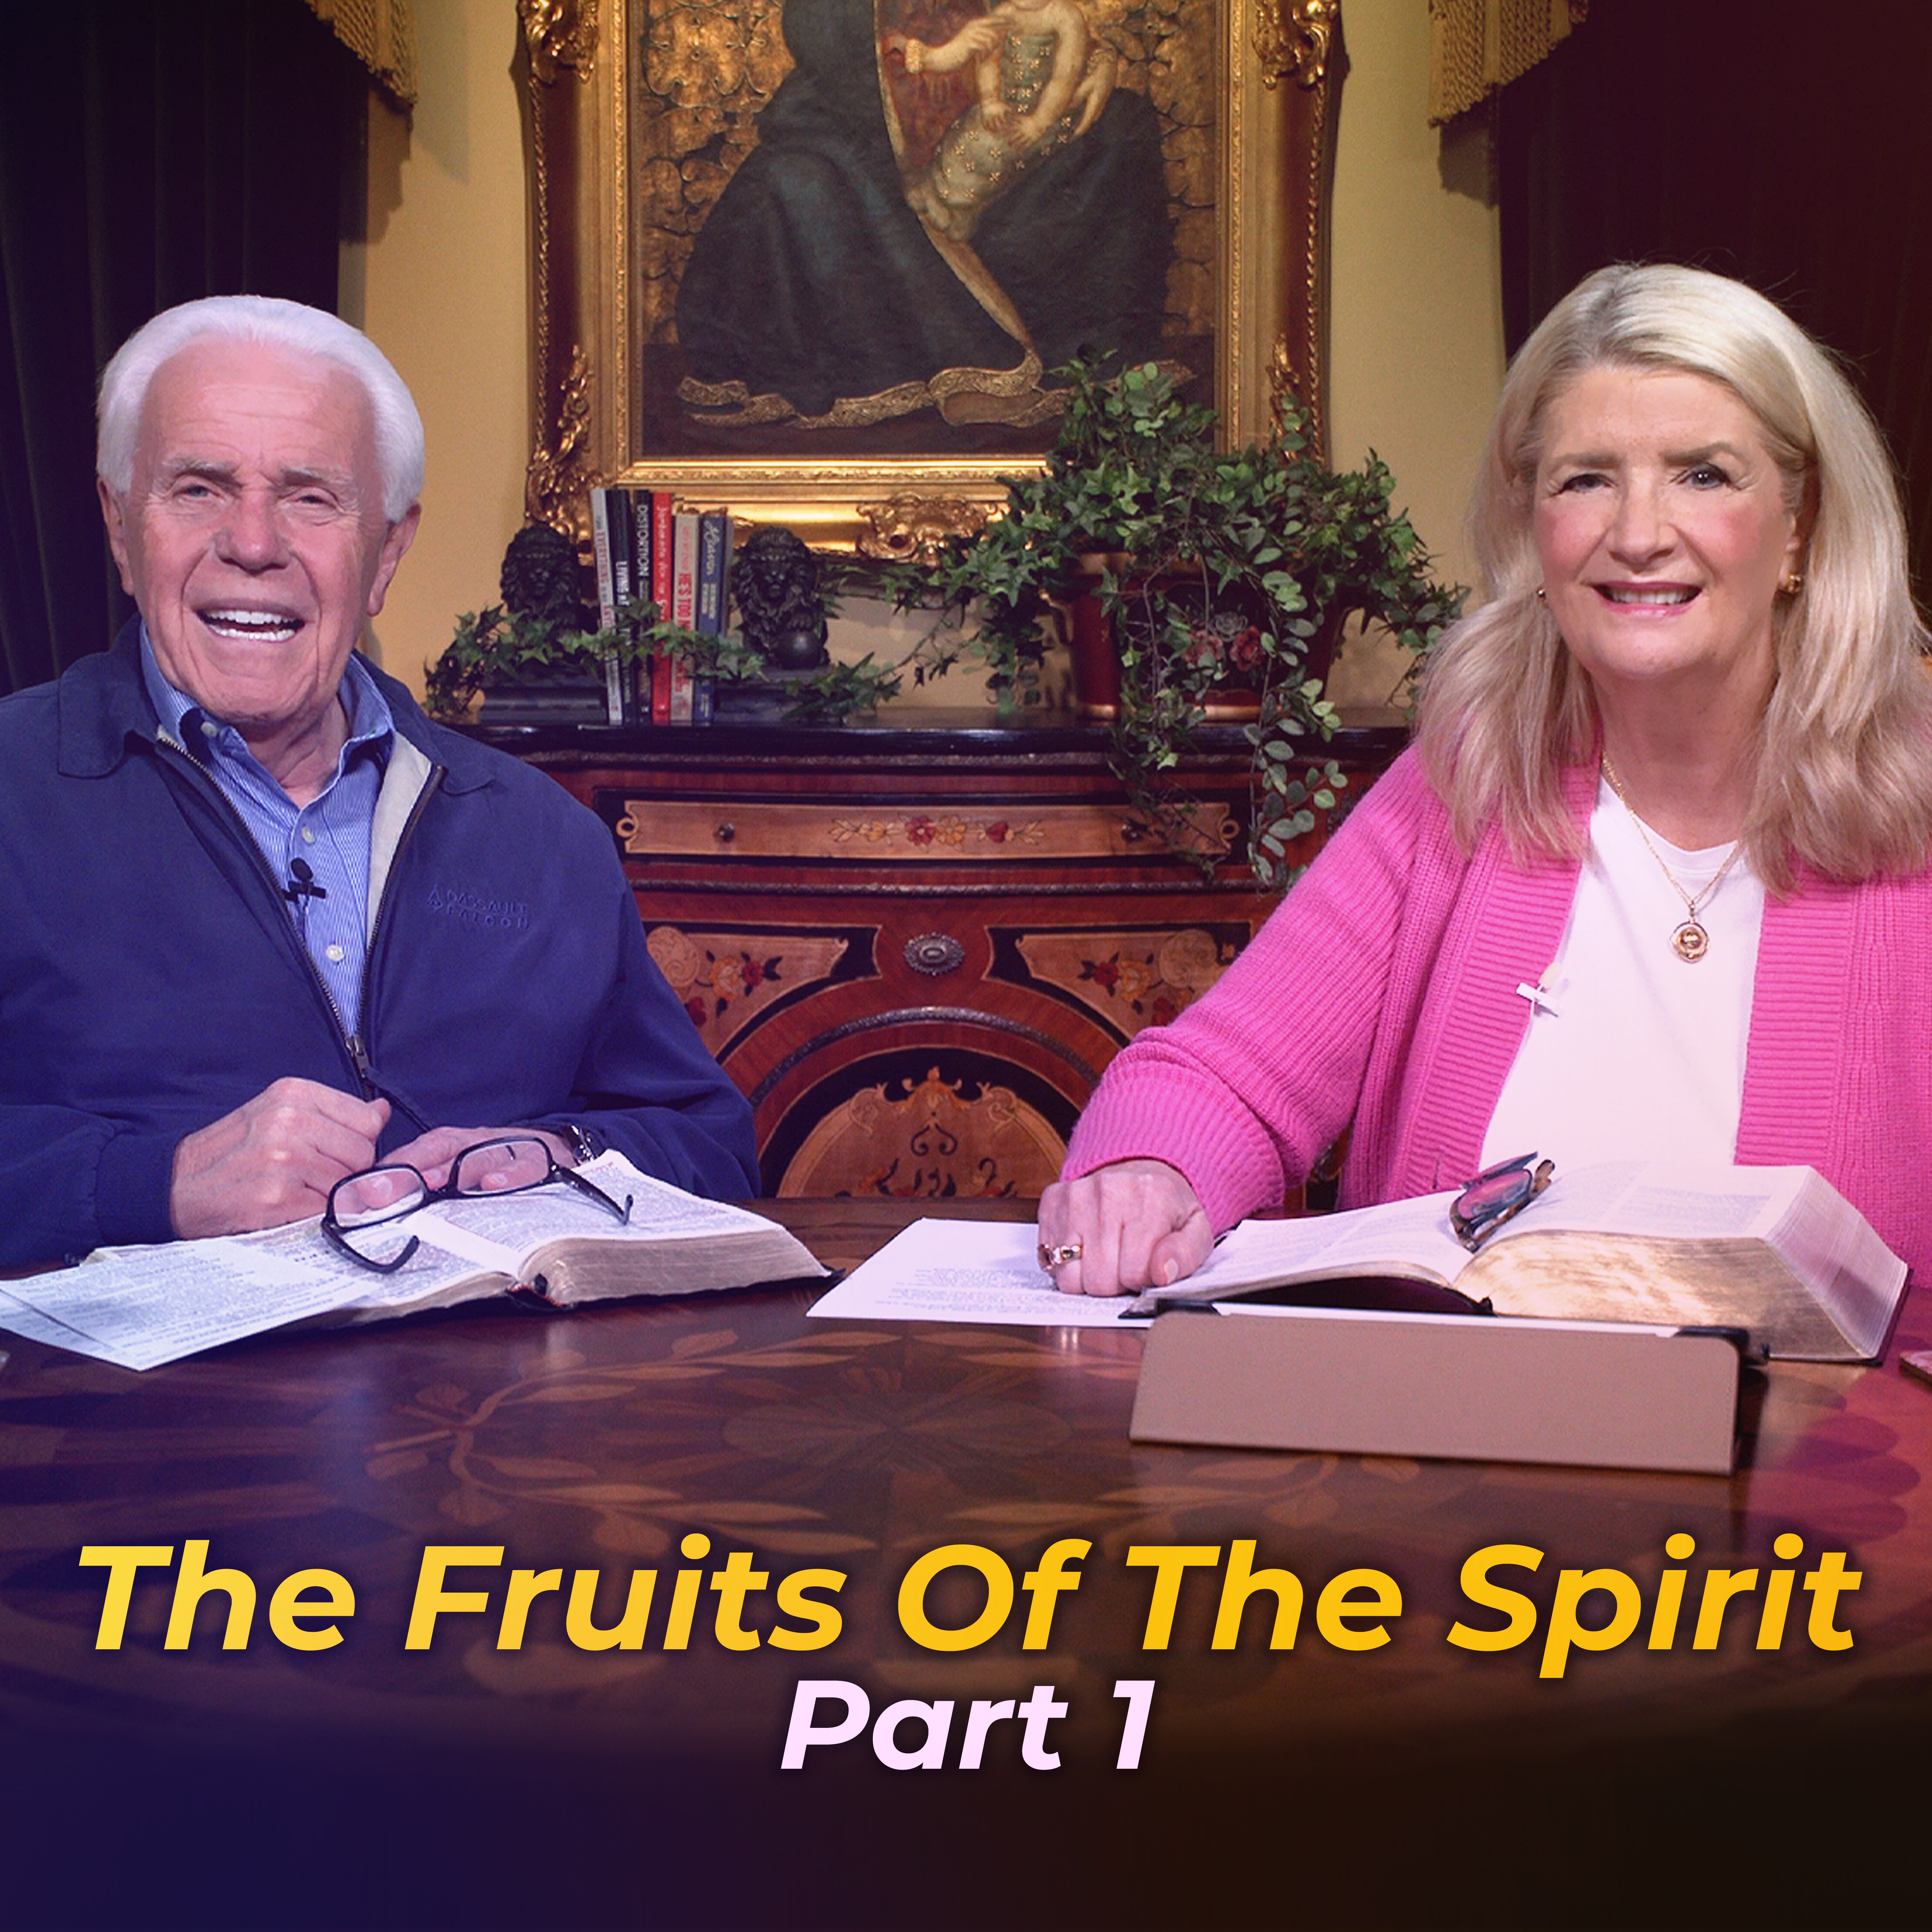 The Fruits Of The Spirit, Part 1